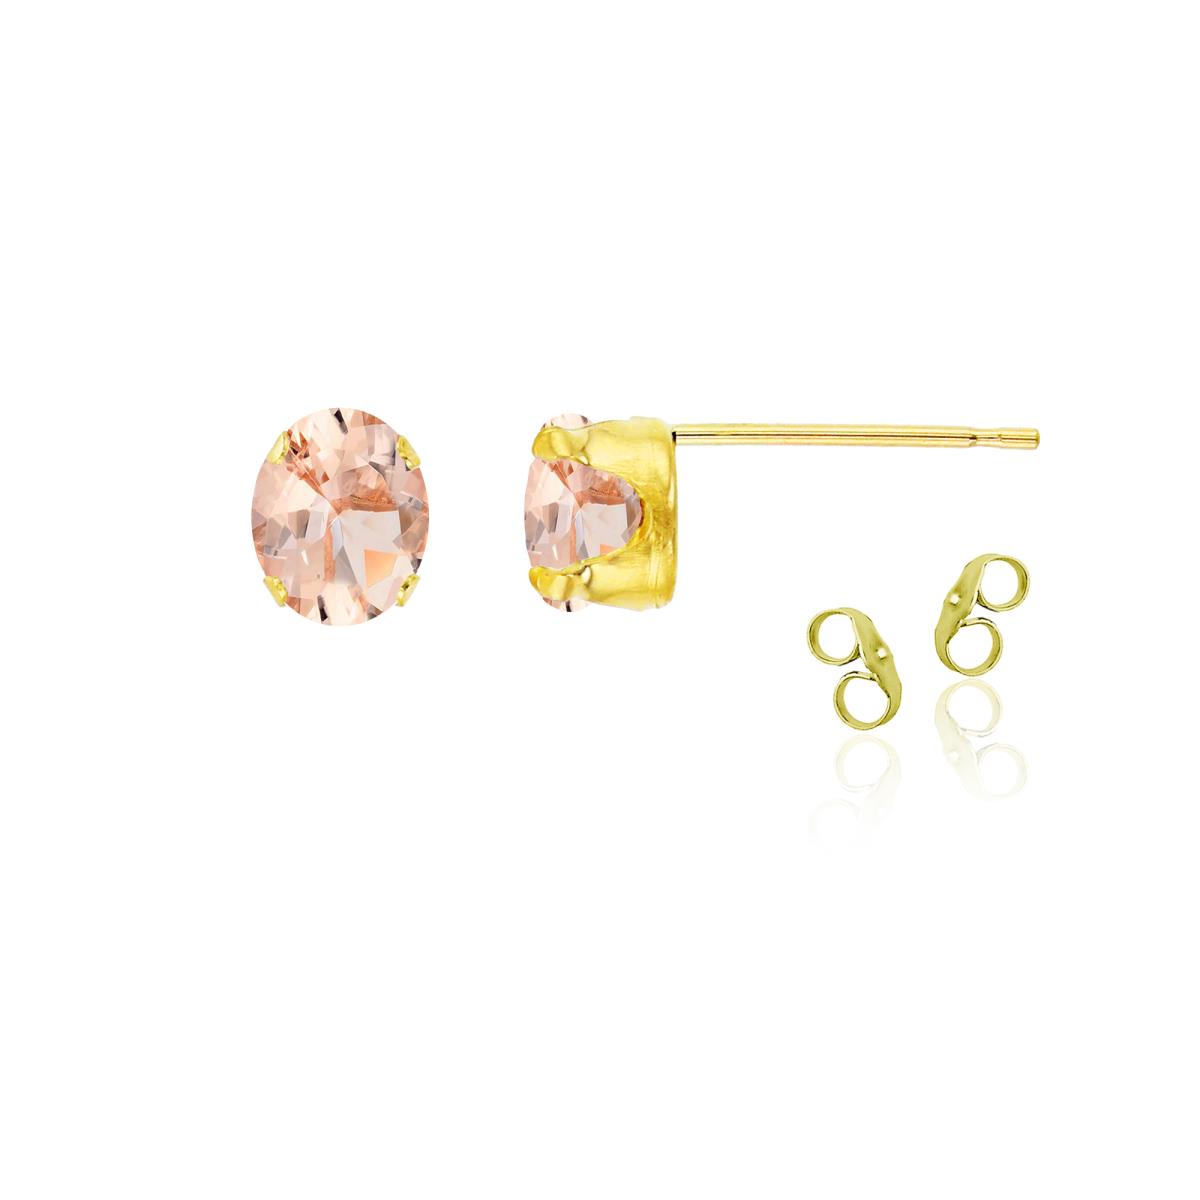 Sterling Silver Yellow 6x4mm Oval Morganite Stud Earring with Clutch